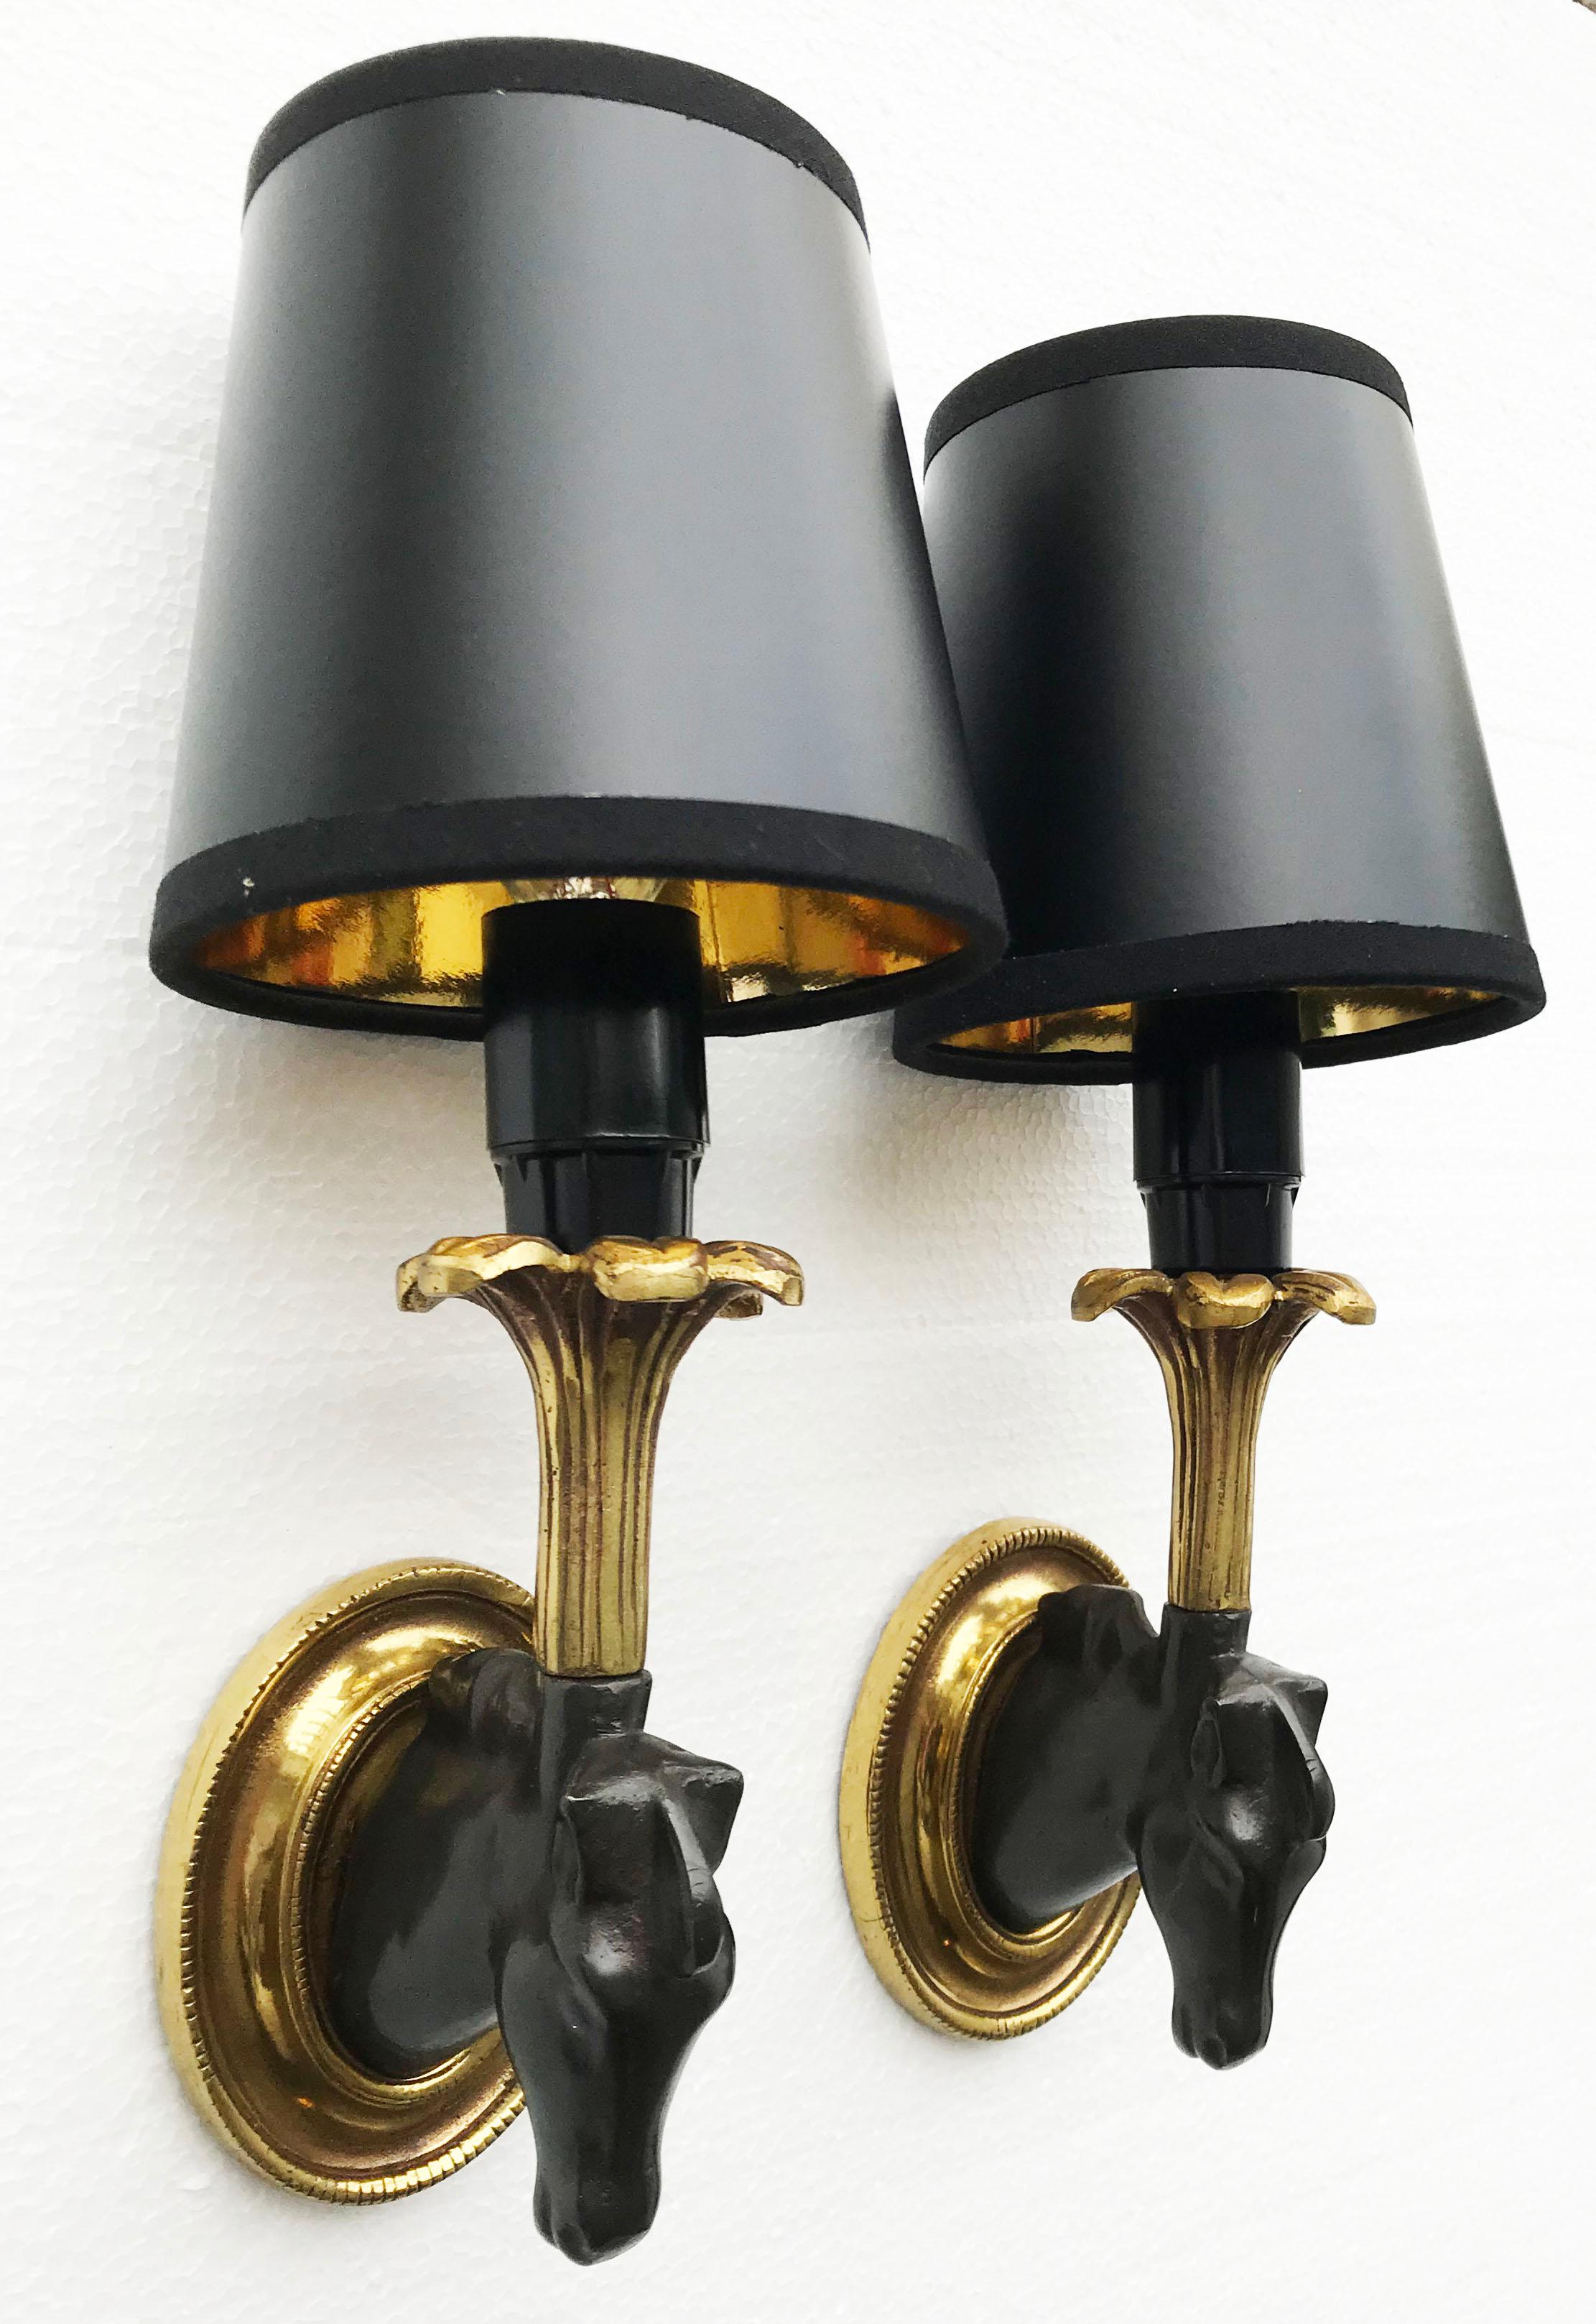 Superb pair of 2 patinas Horse sconces, bronze and brass color, by Maison Lancel, France 1960.
Measures: Shade 4 inches height, 4 inches base, 3 inches top.
Sconces without shade 7 inches.
Have a look on our impressive collection of French and